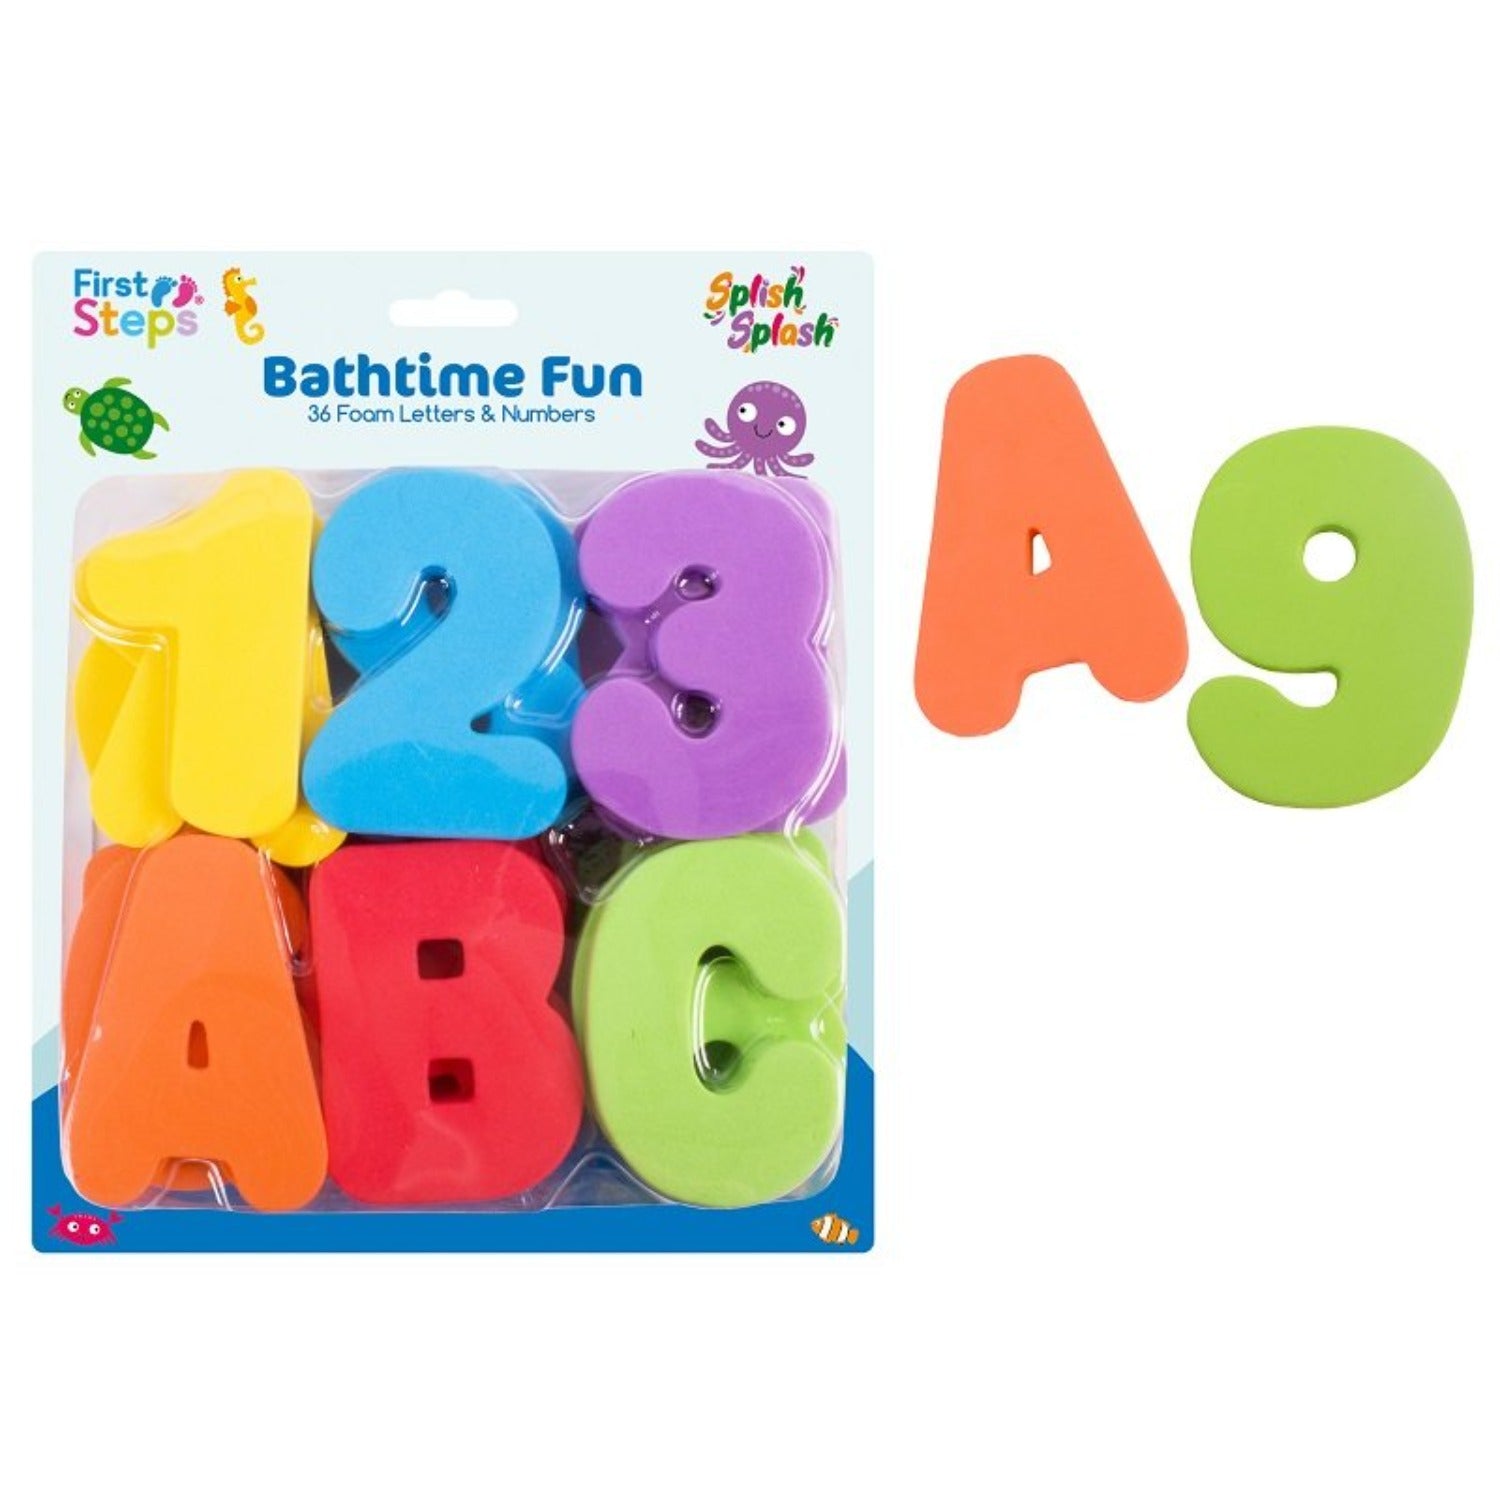 foam letters and numbers